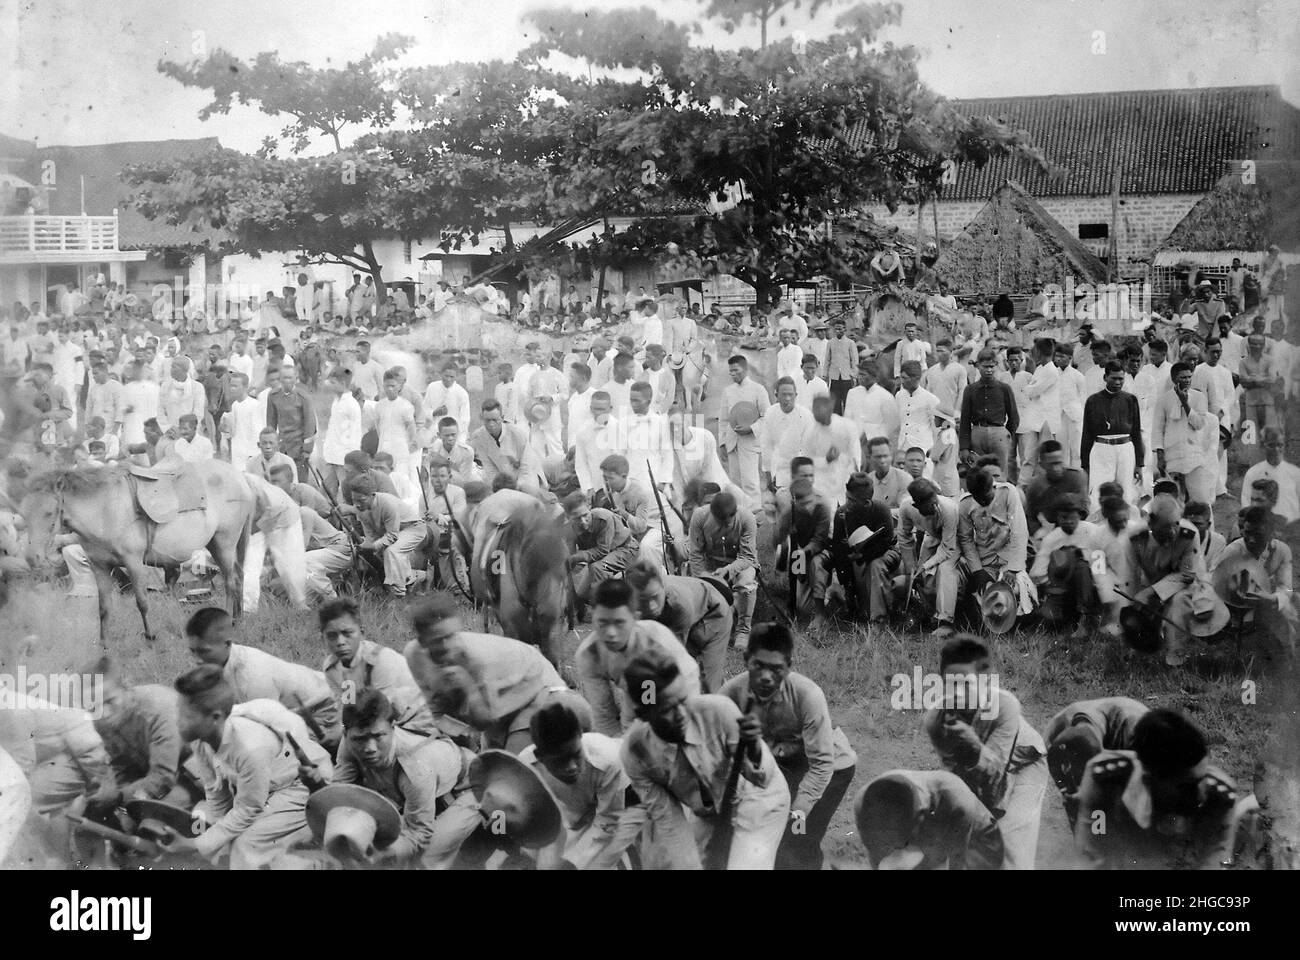 Fiipino soldiers laying down their weapons in surrender during the Filipino-American war which lasted from 1899 to 1902 Stock Photo